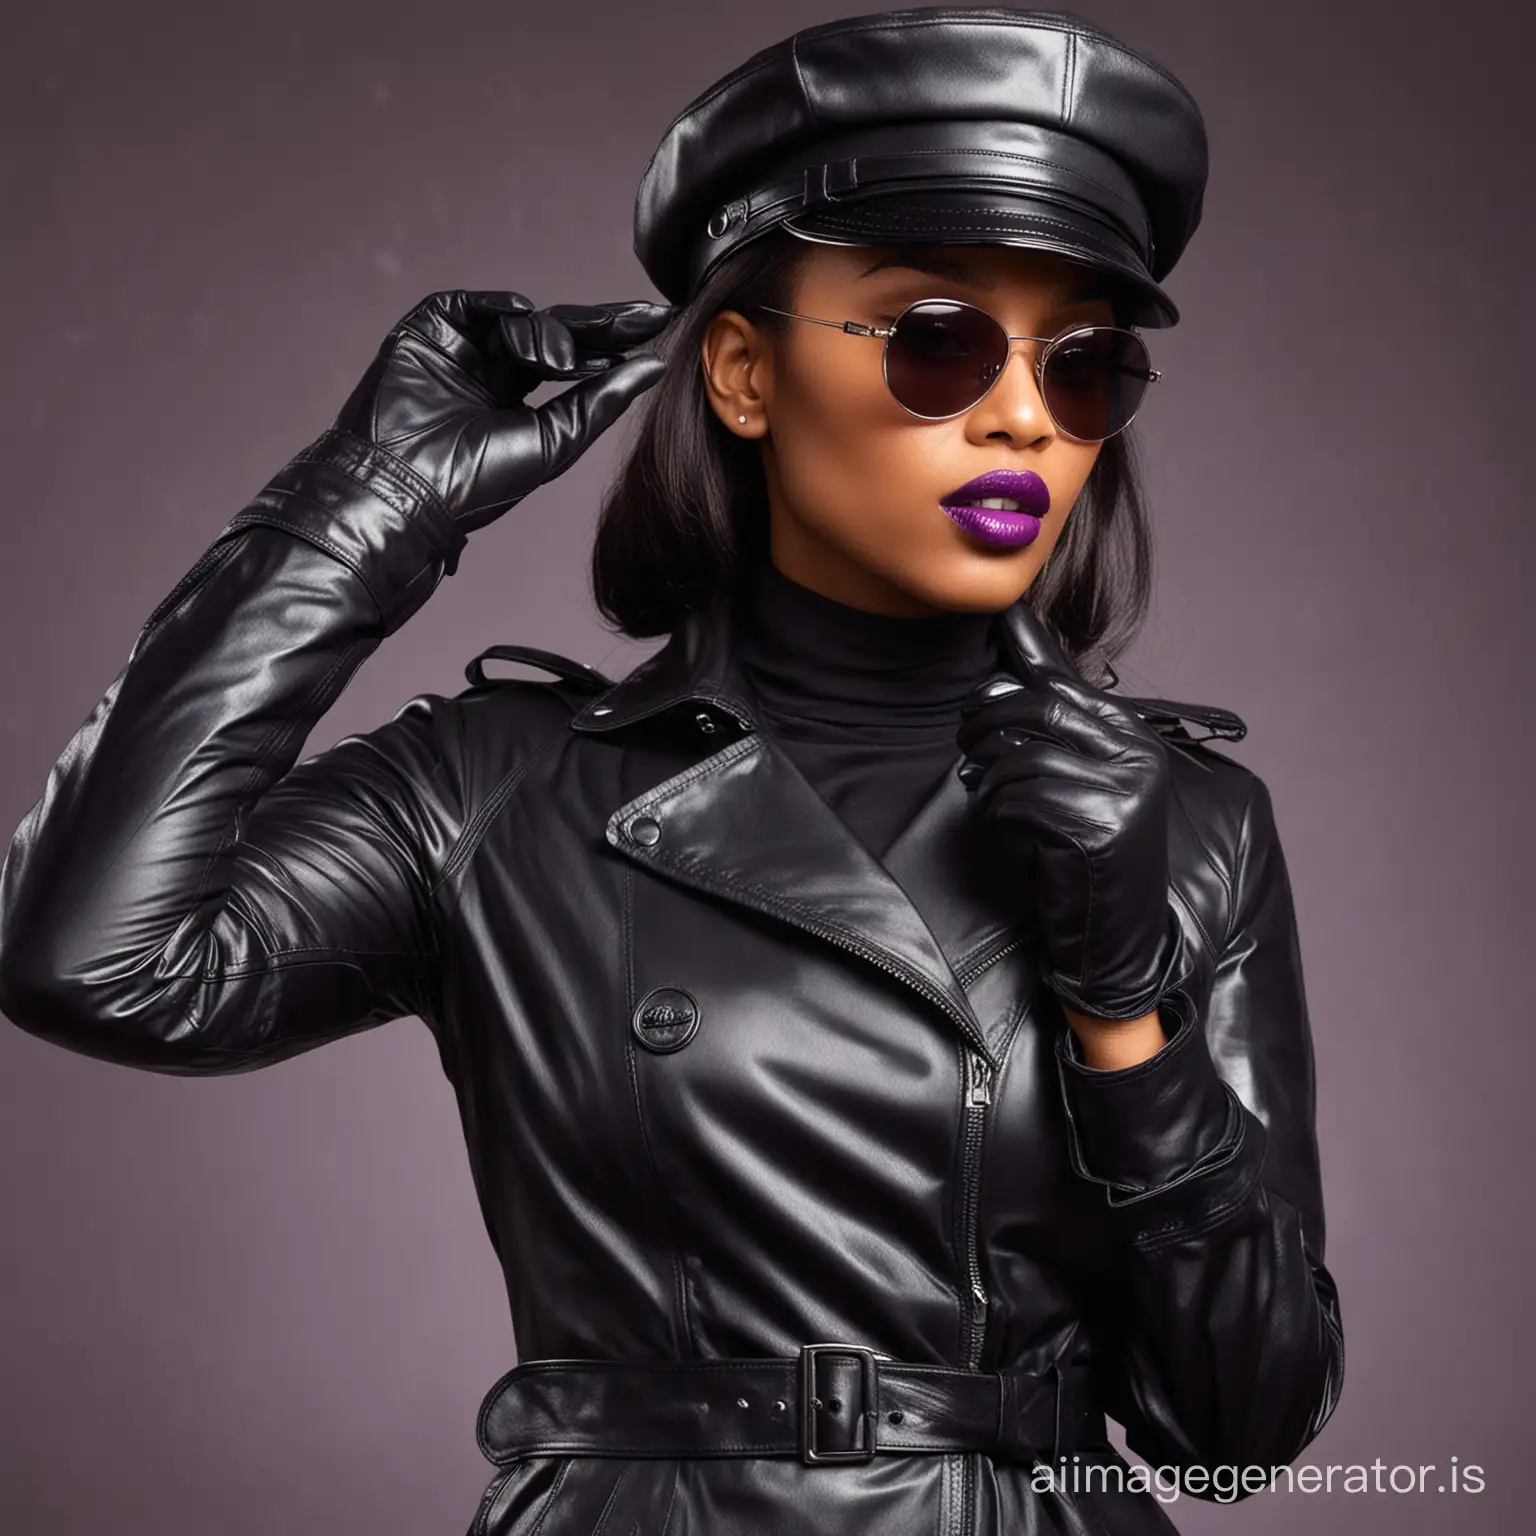 ebony woman in black leather trench coat, leather gloves, sunglasses, purple lipstick, black leather masters cap